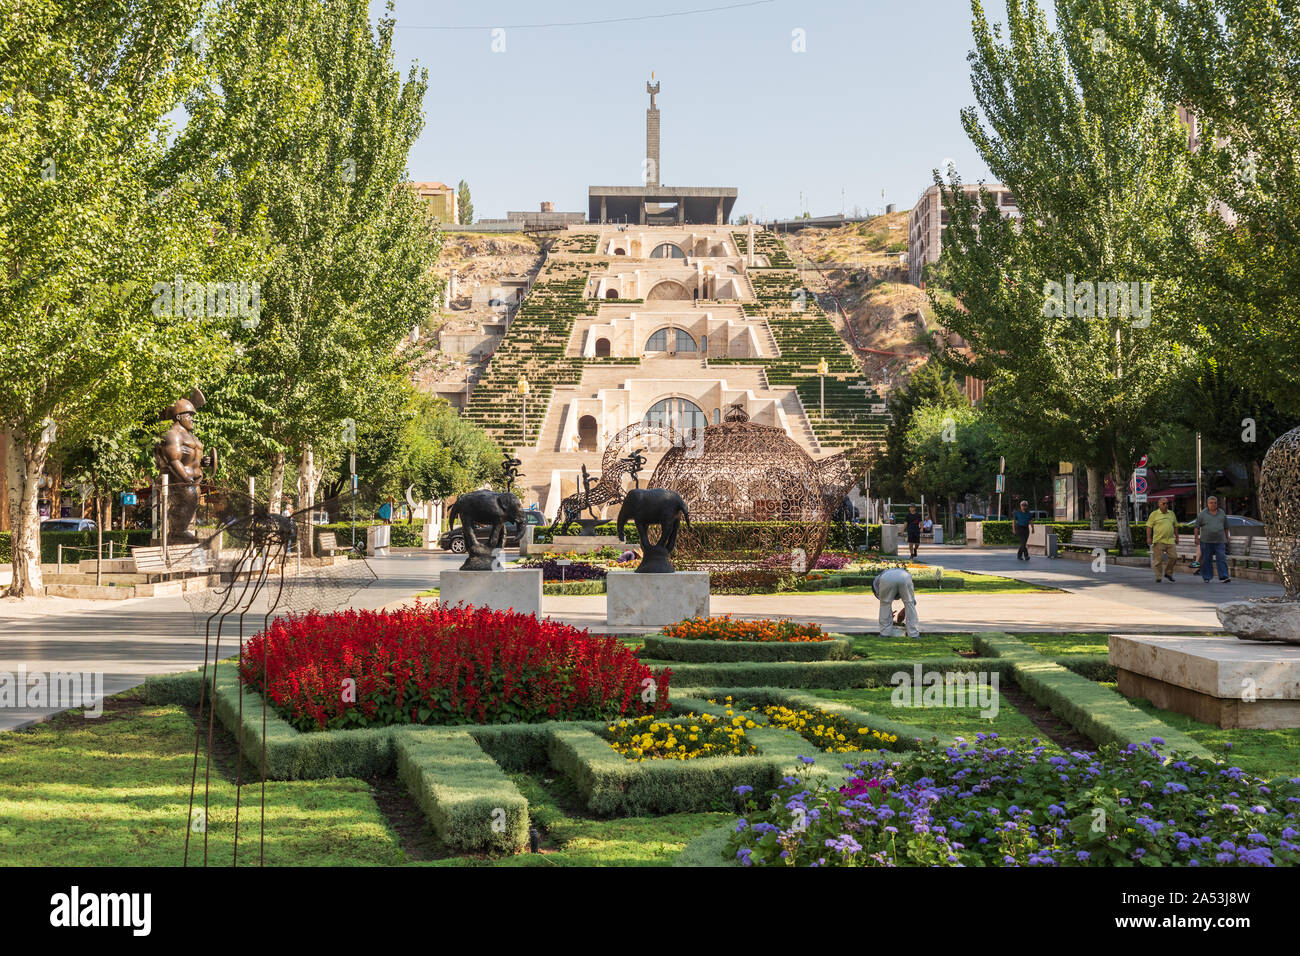 Armenia. Yerevan. August 16, 2018. Sculpture Garden and the Cascade Complex at the Cafesjian Center for the Arts. Stock Photo